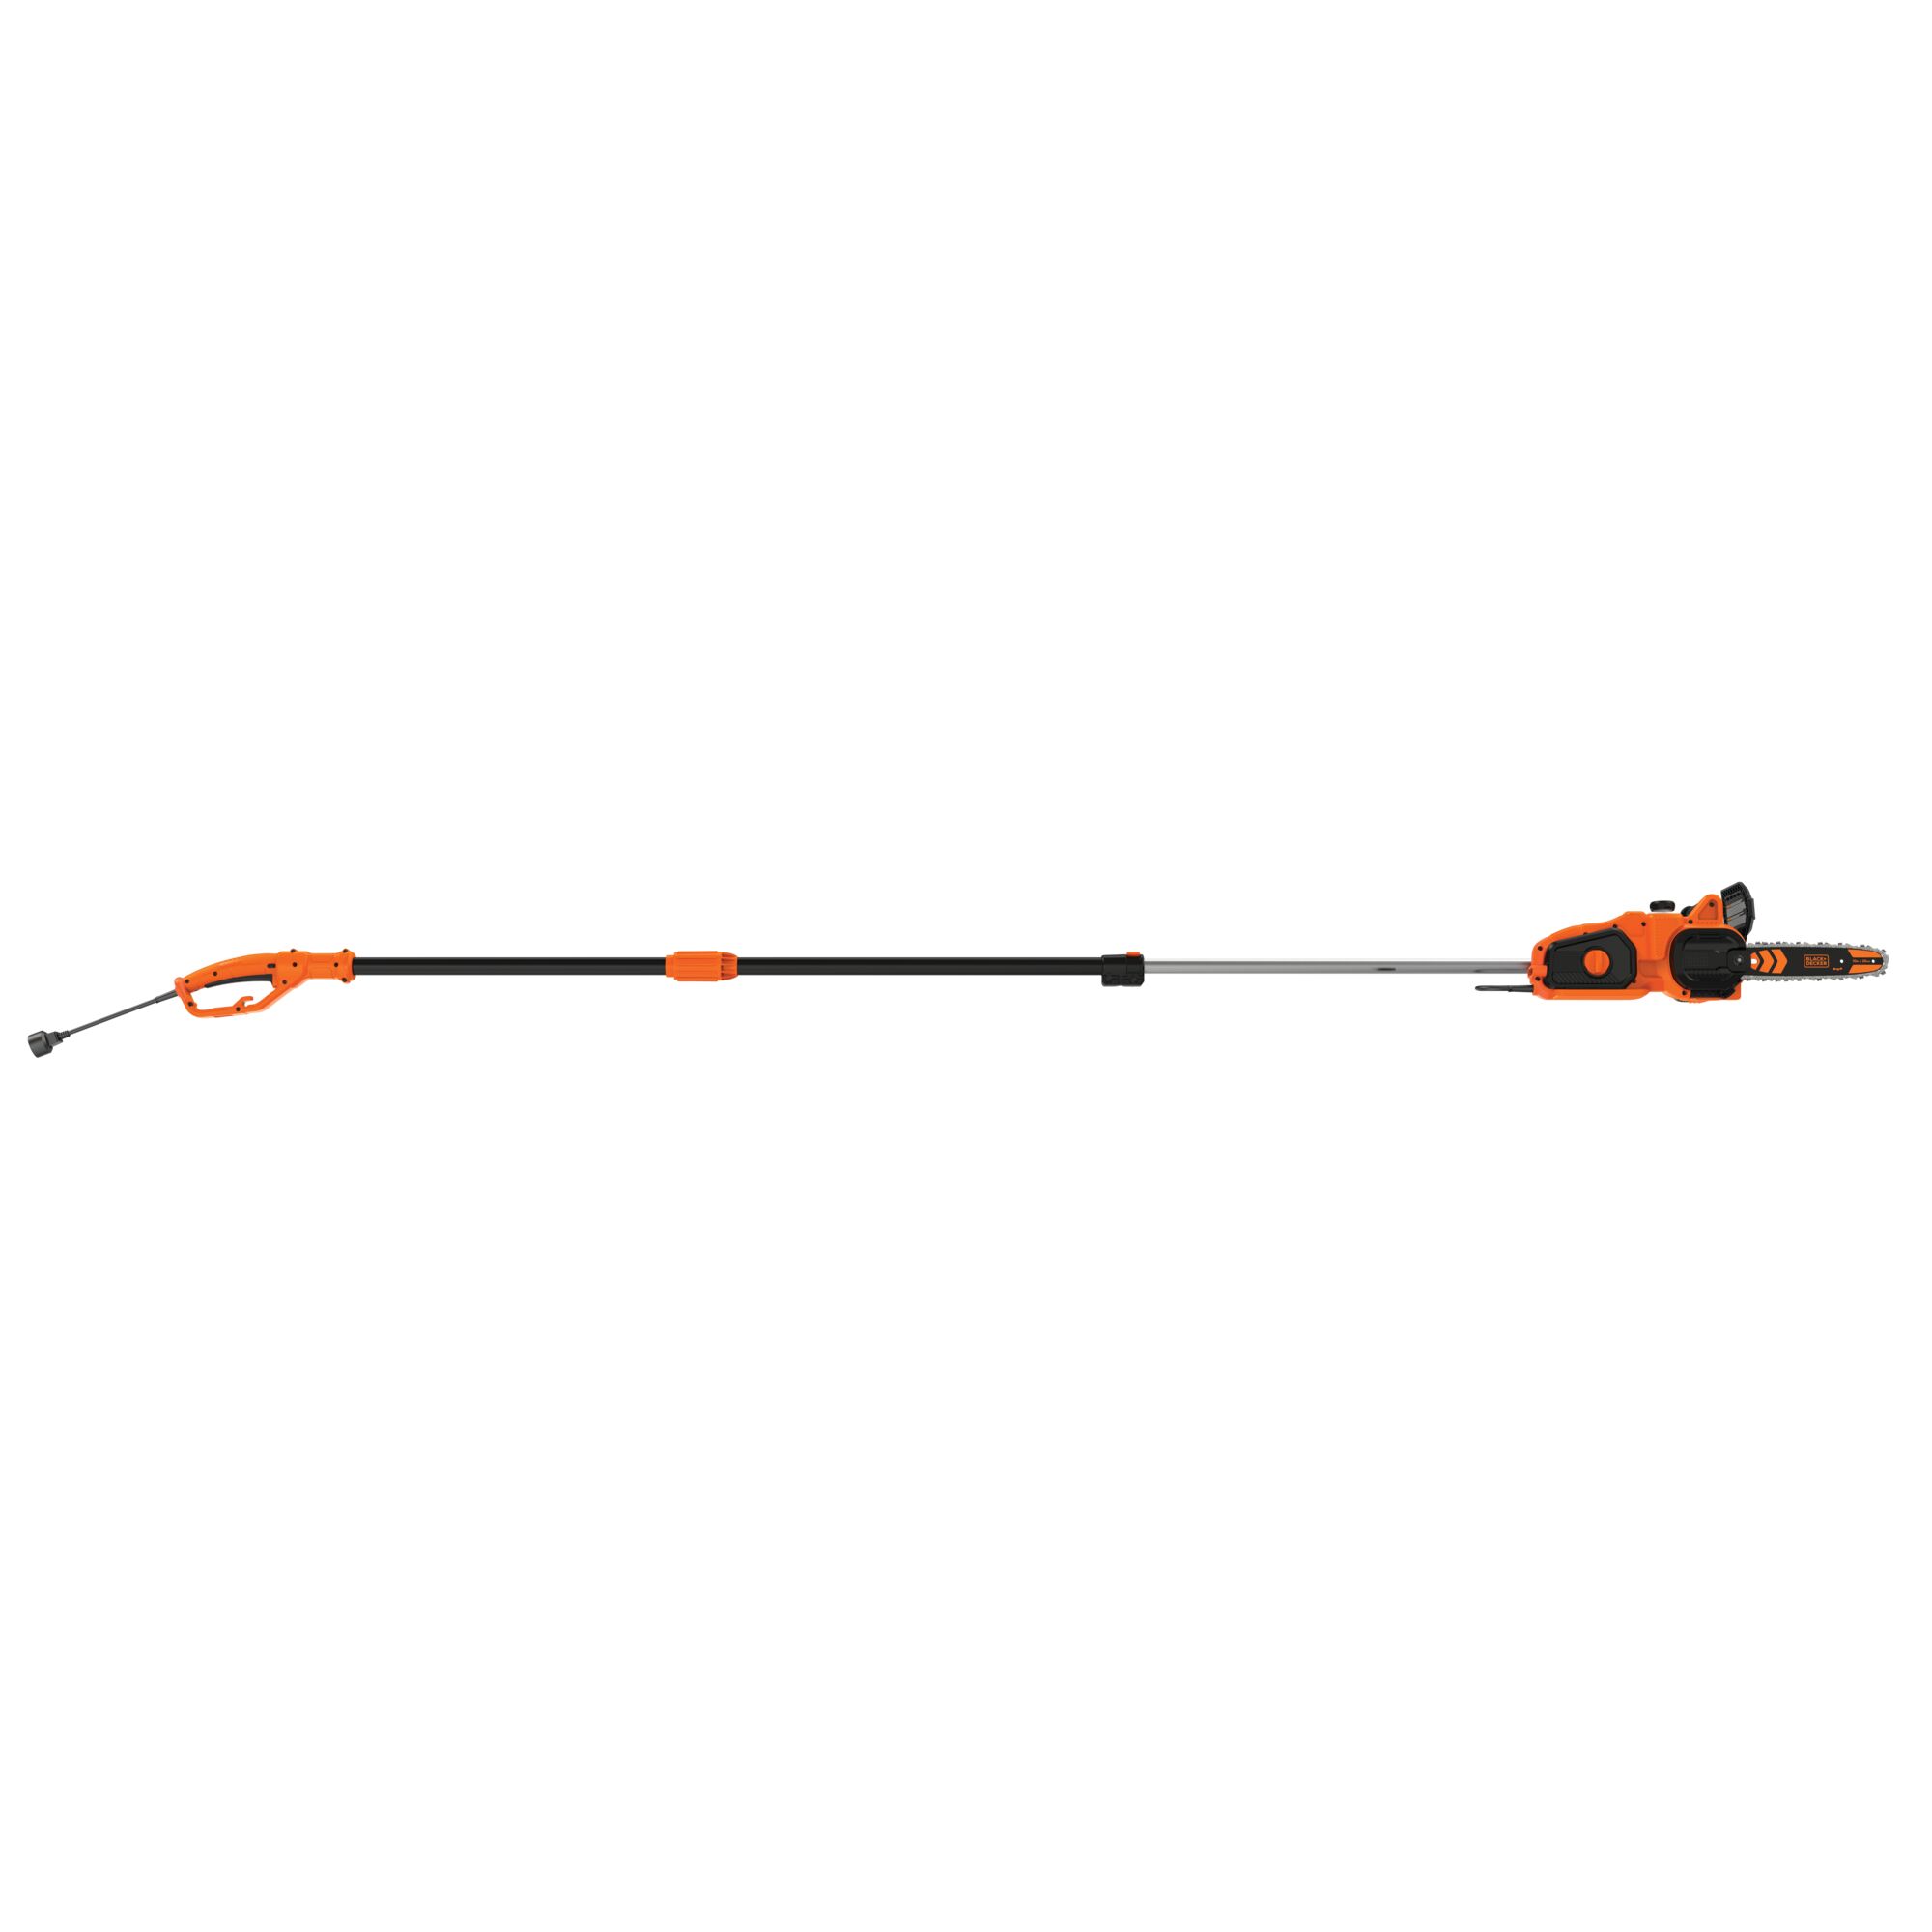 8 AMP 10 inch 2 in 1 Electric Pole Chainsaw.